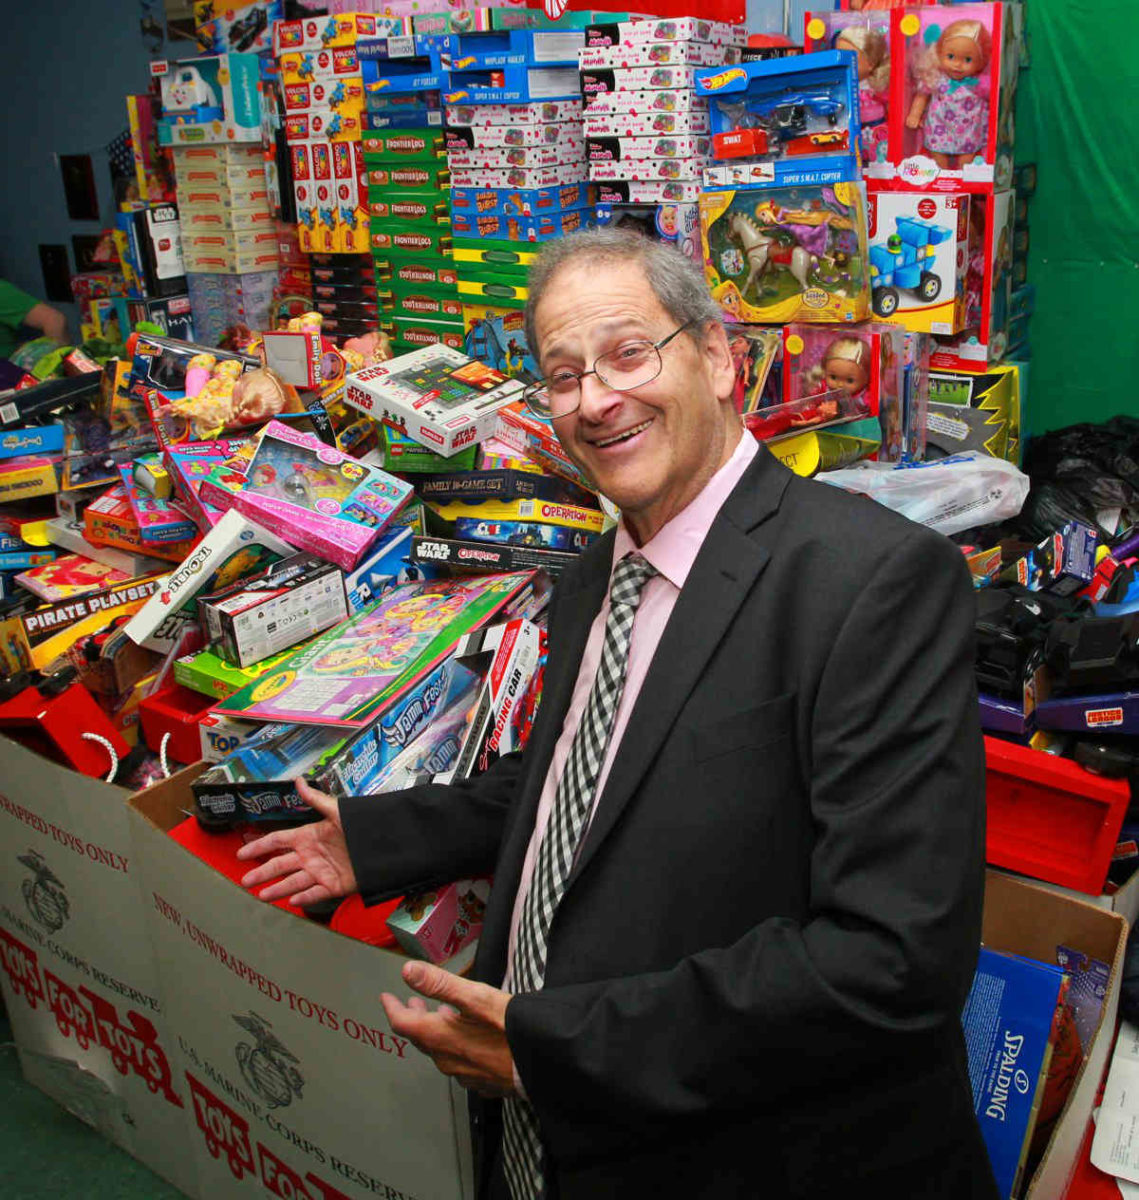 Holiday haul: Political club collects thousands of gifts for youngsters during annual toy drive